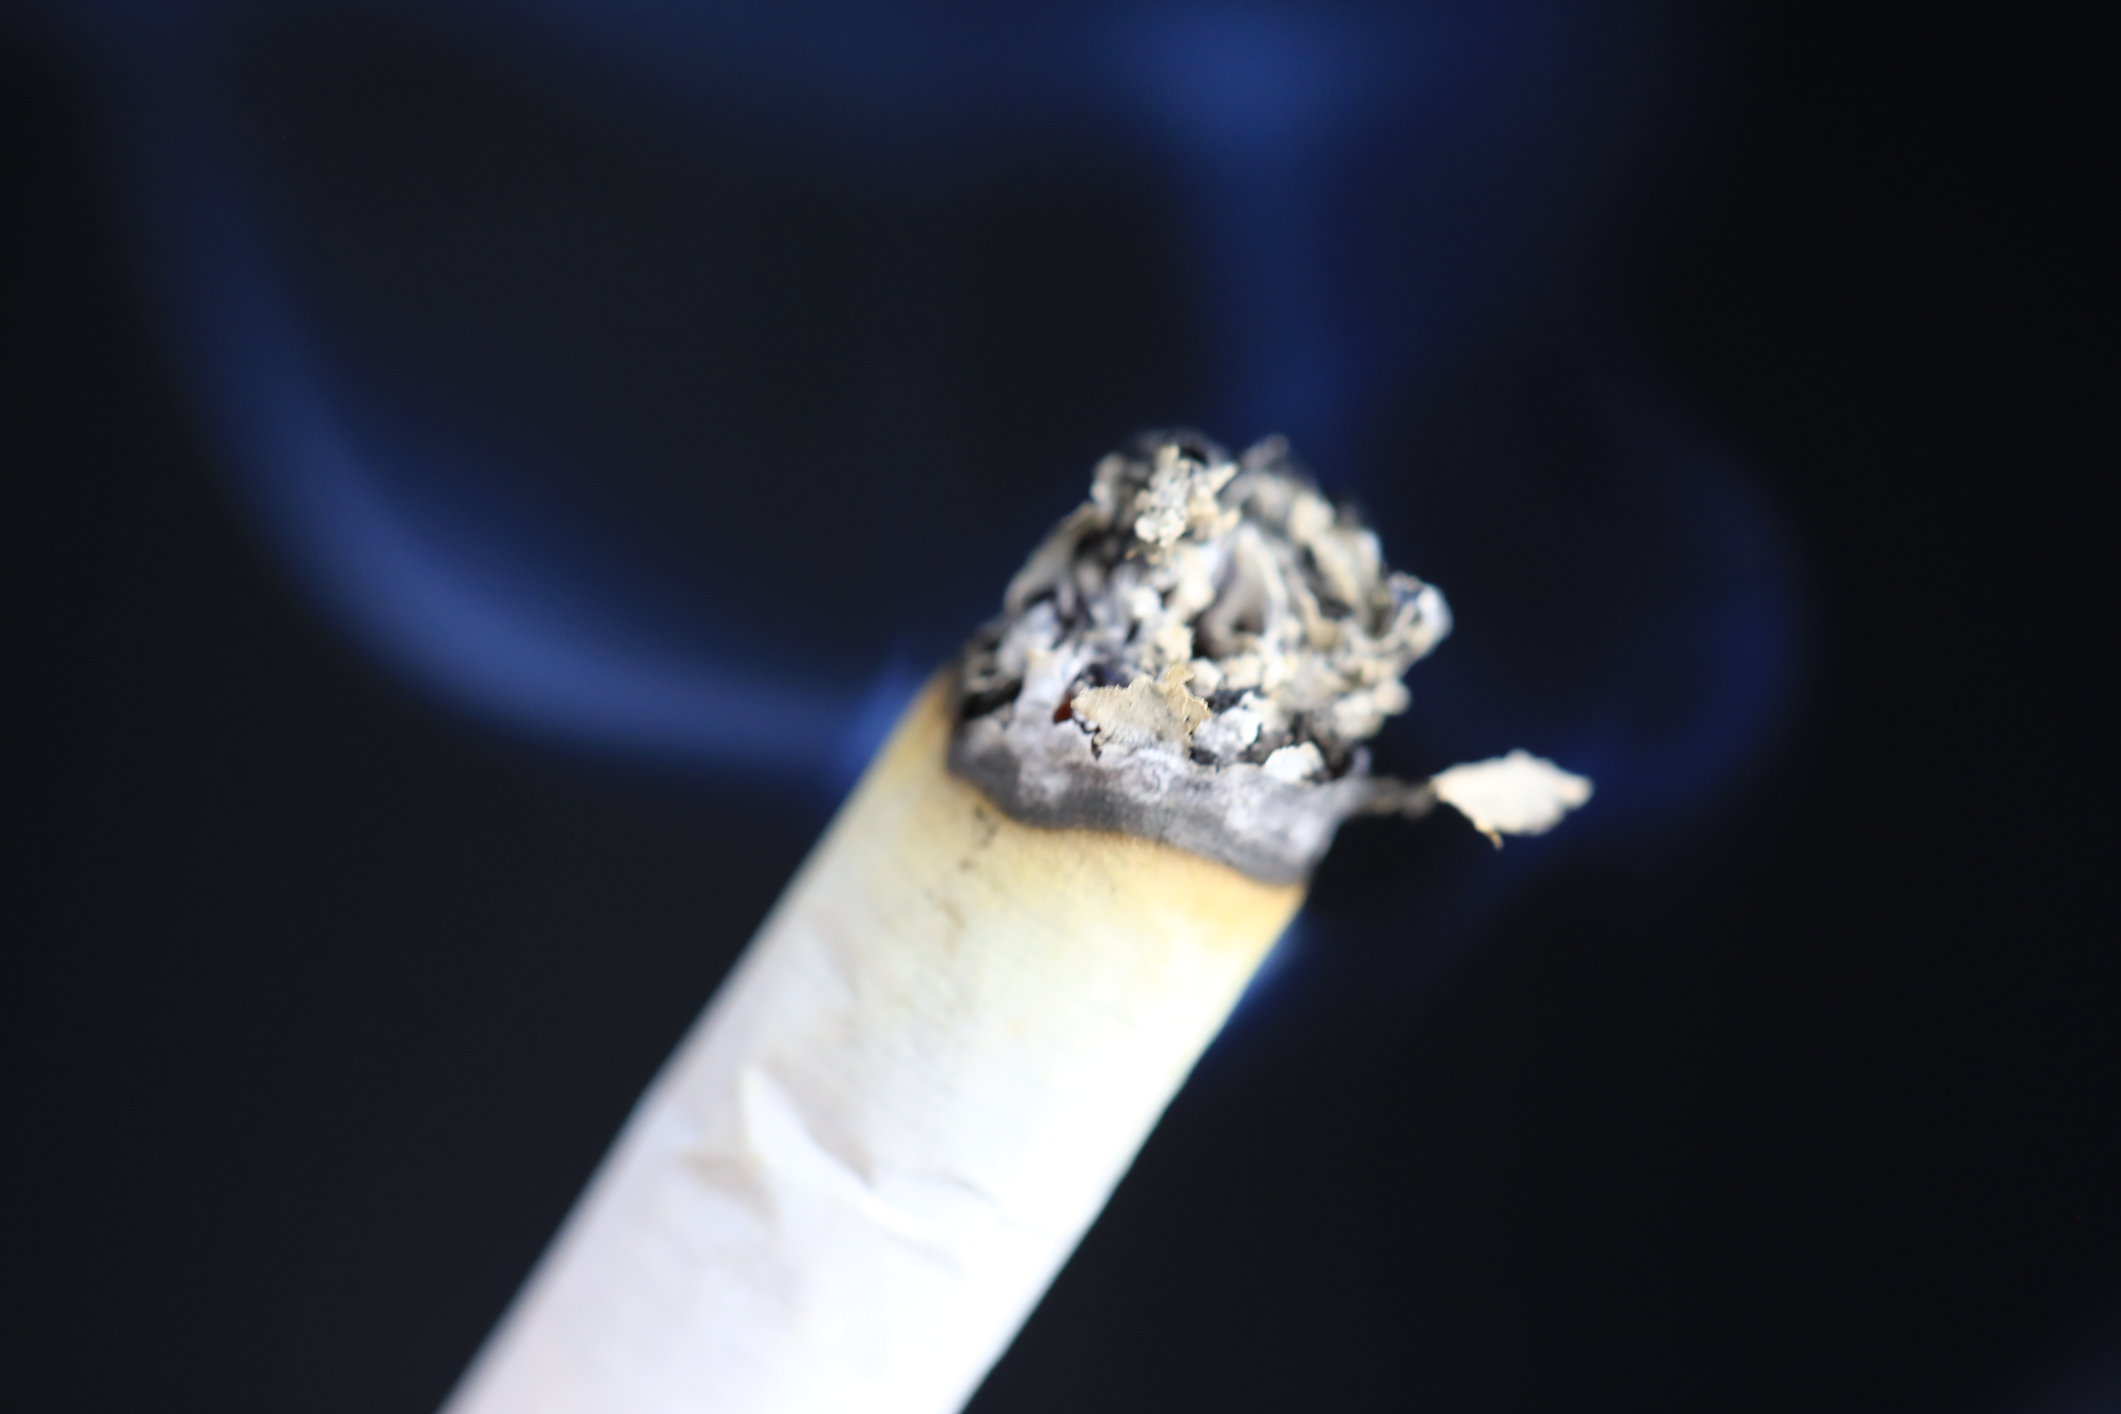 A photo of a cigarette smoldering against a dark blue background.